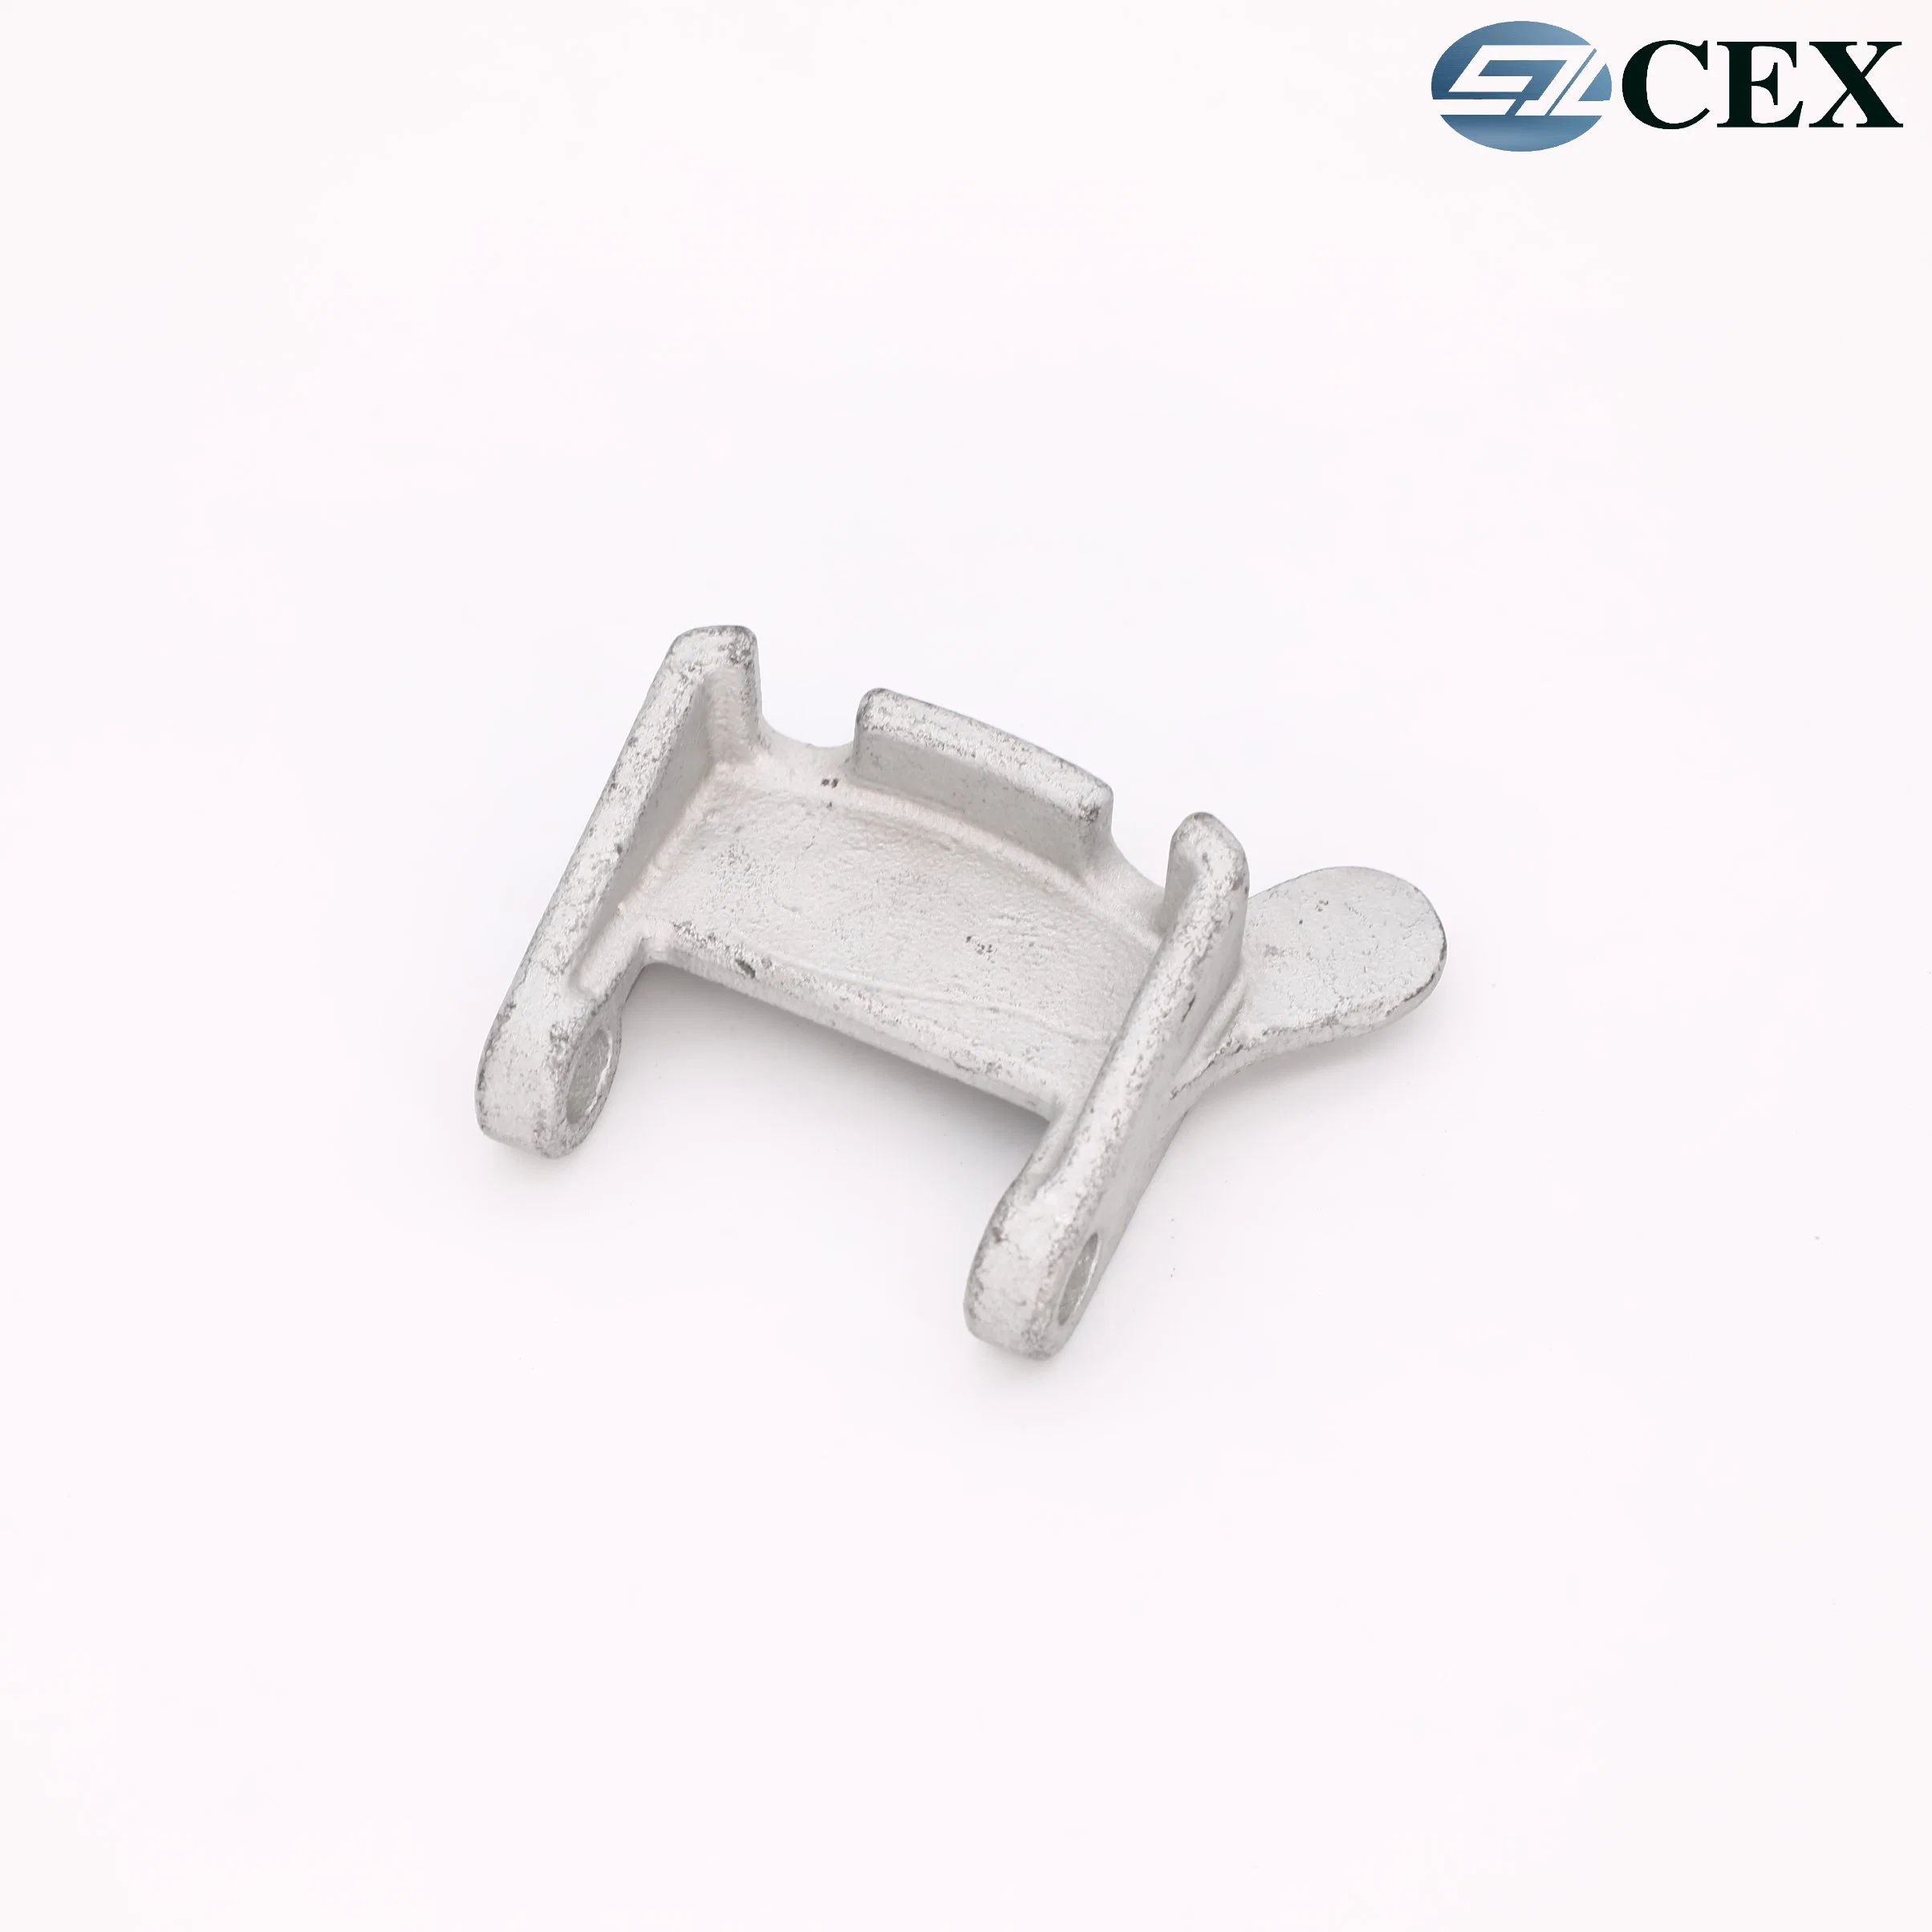 Home Appliances Used Designed High Density Performance Die Casting Aluminum Alloy Pot/ Pan